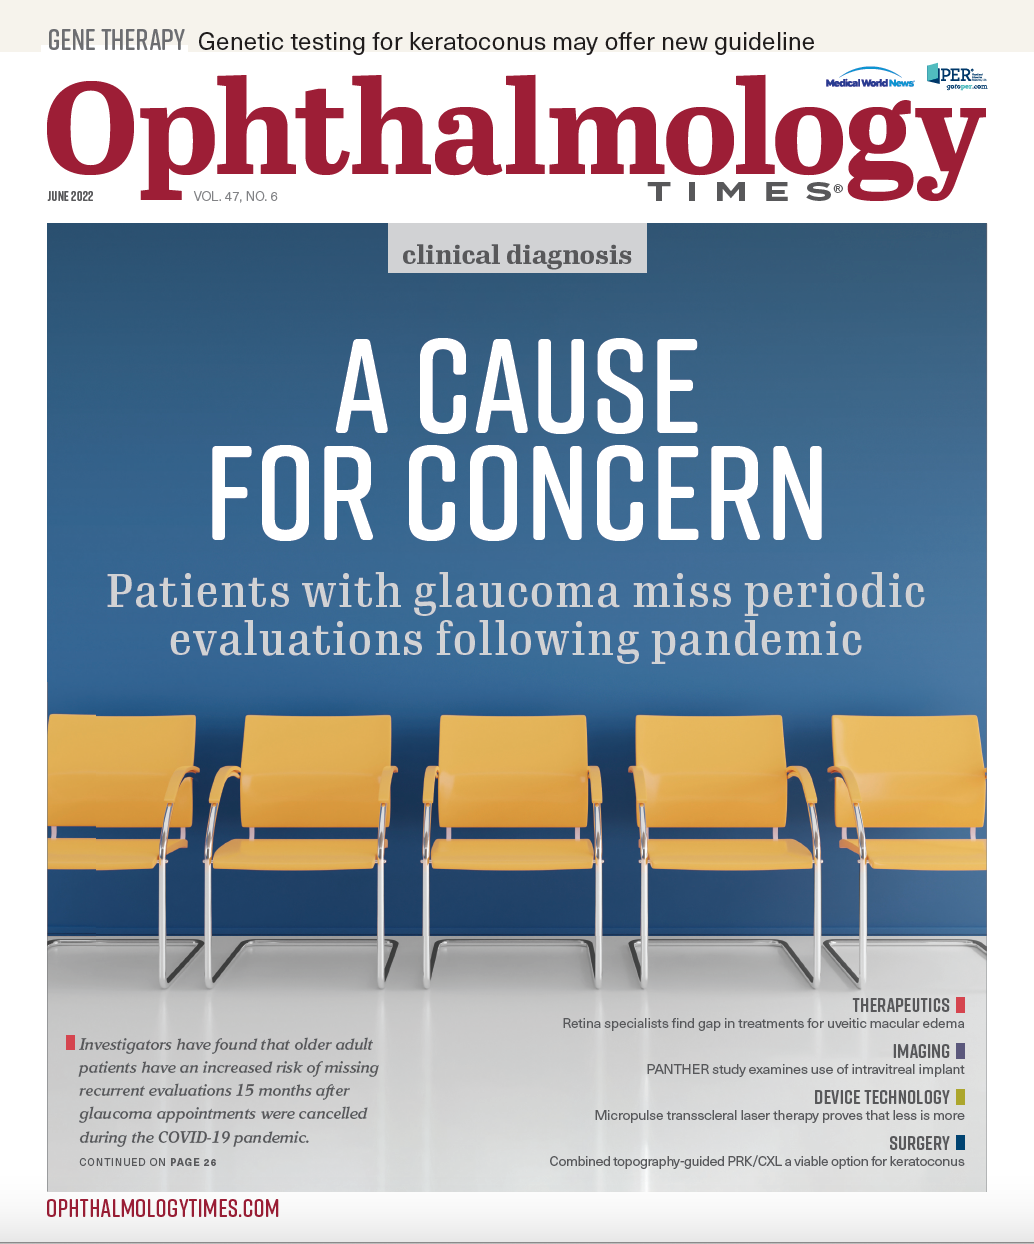 Ophthalmology Times: June 2022